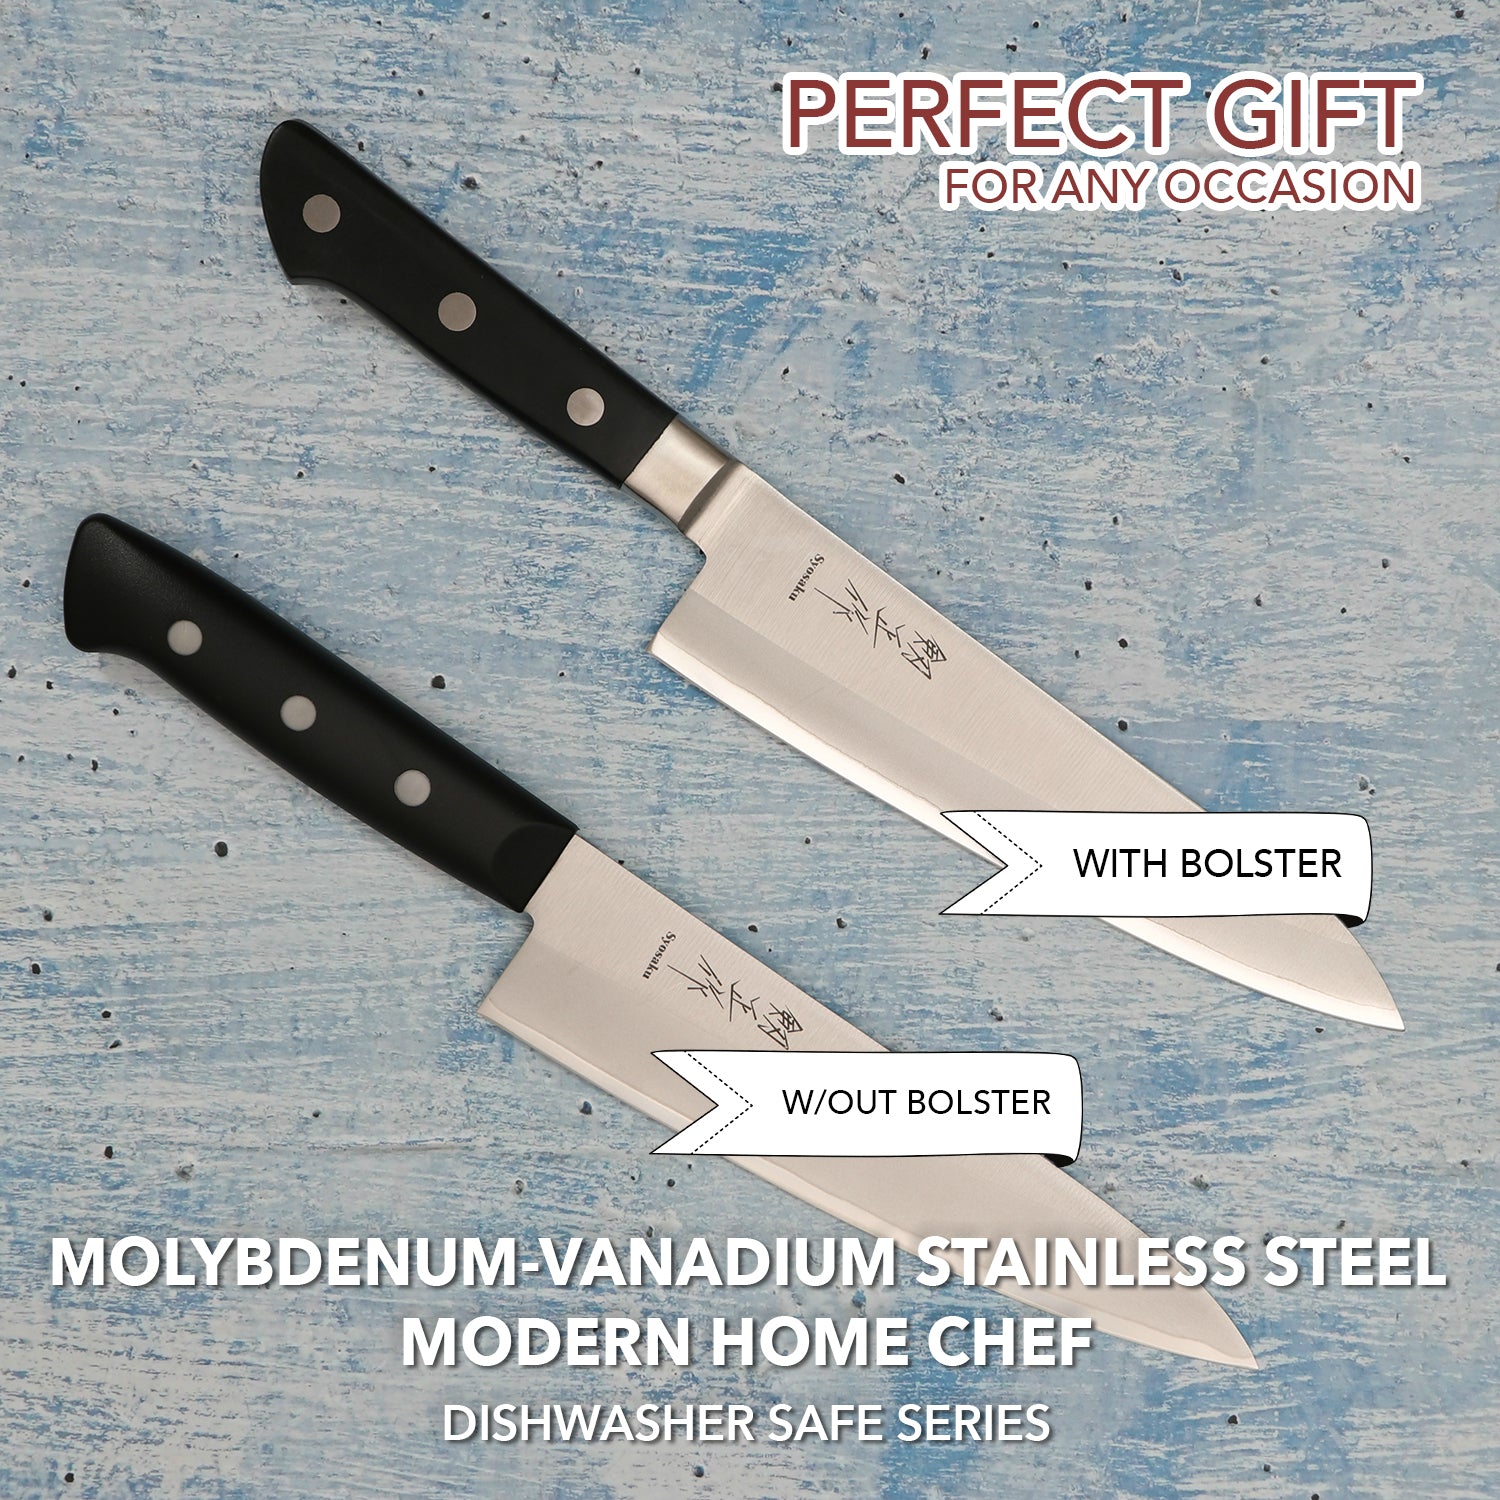  chef knife 8 Inch - kitchen knife European steel - best chef  knife for High Carbon Stainless Steel - Chopping knives for Budding Kitchen,  cooking knives,: Home & Kitchen